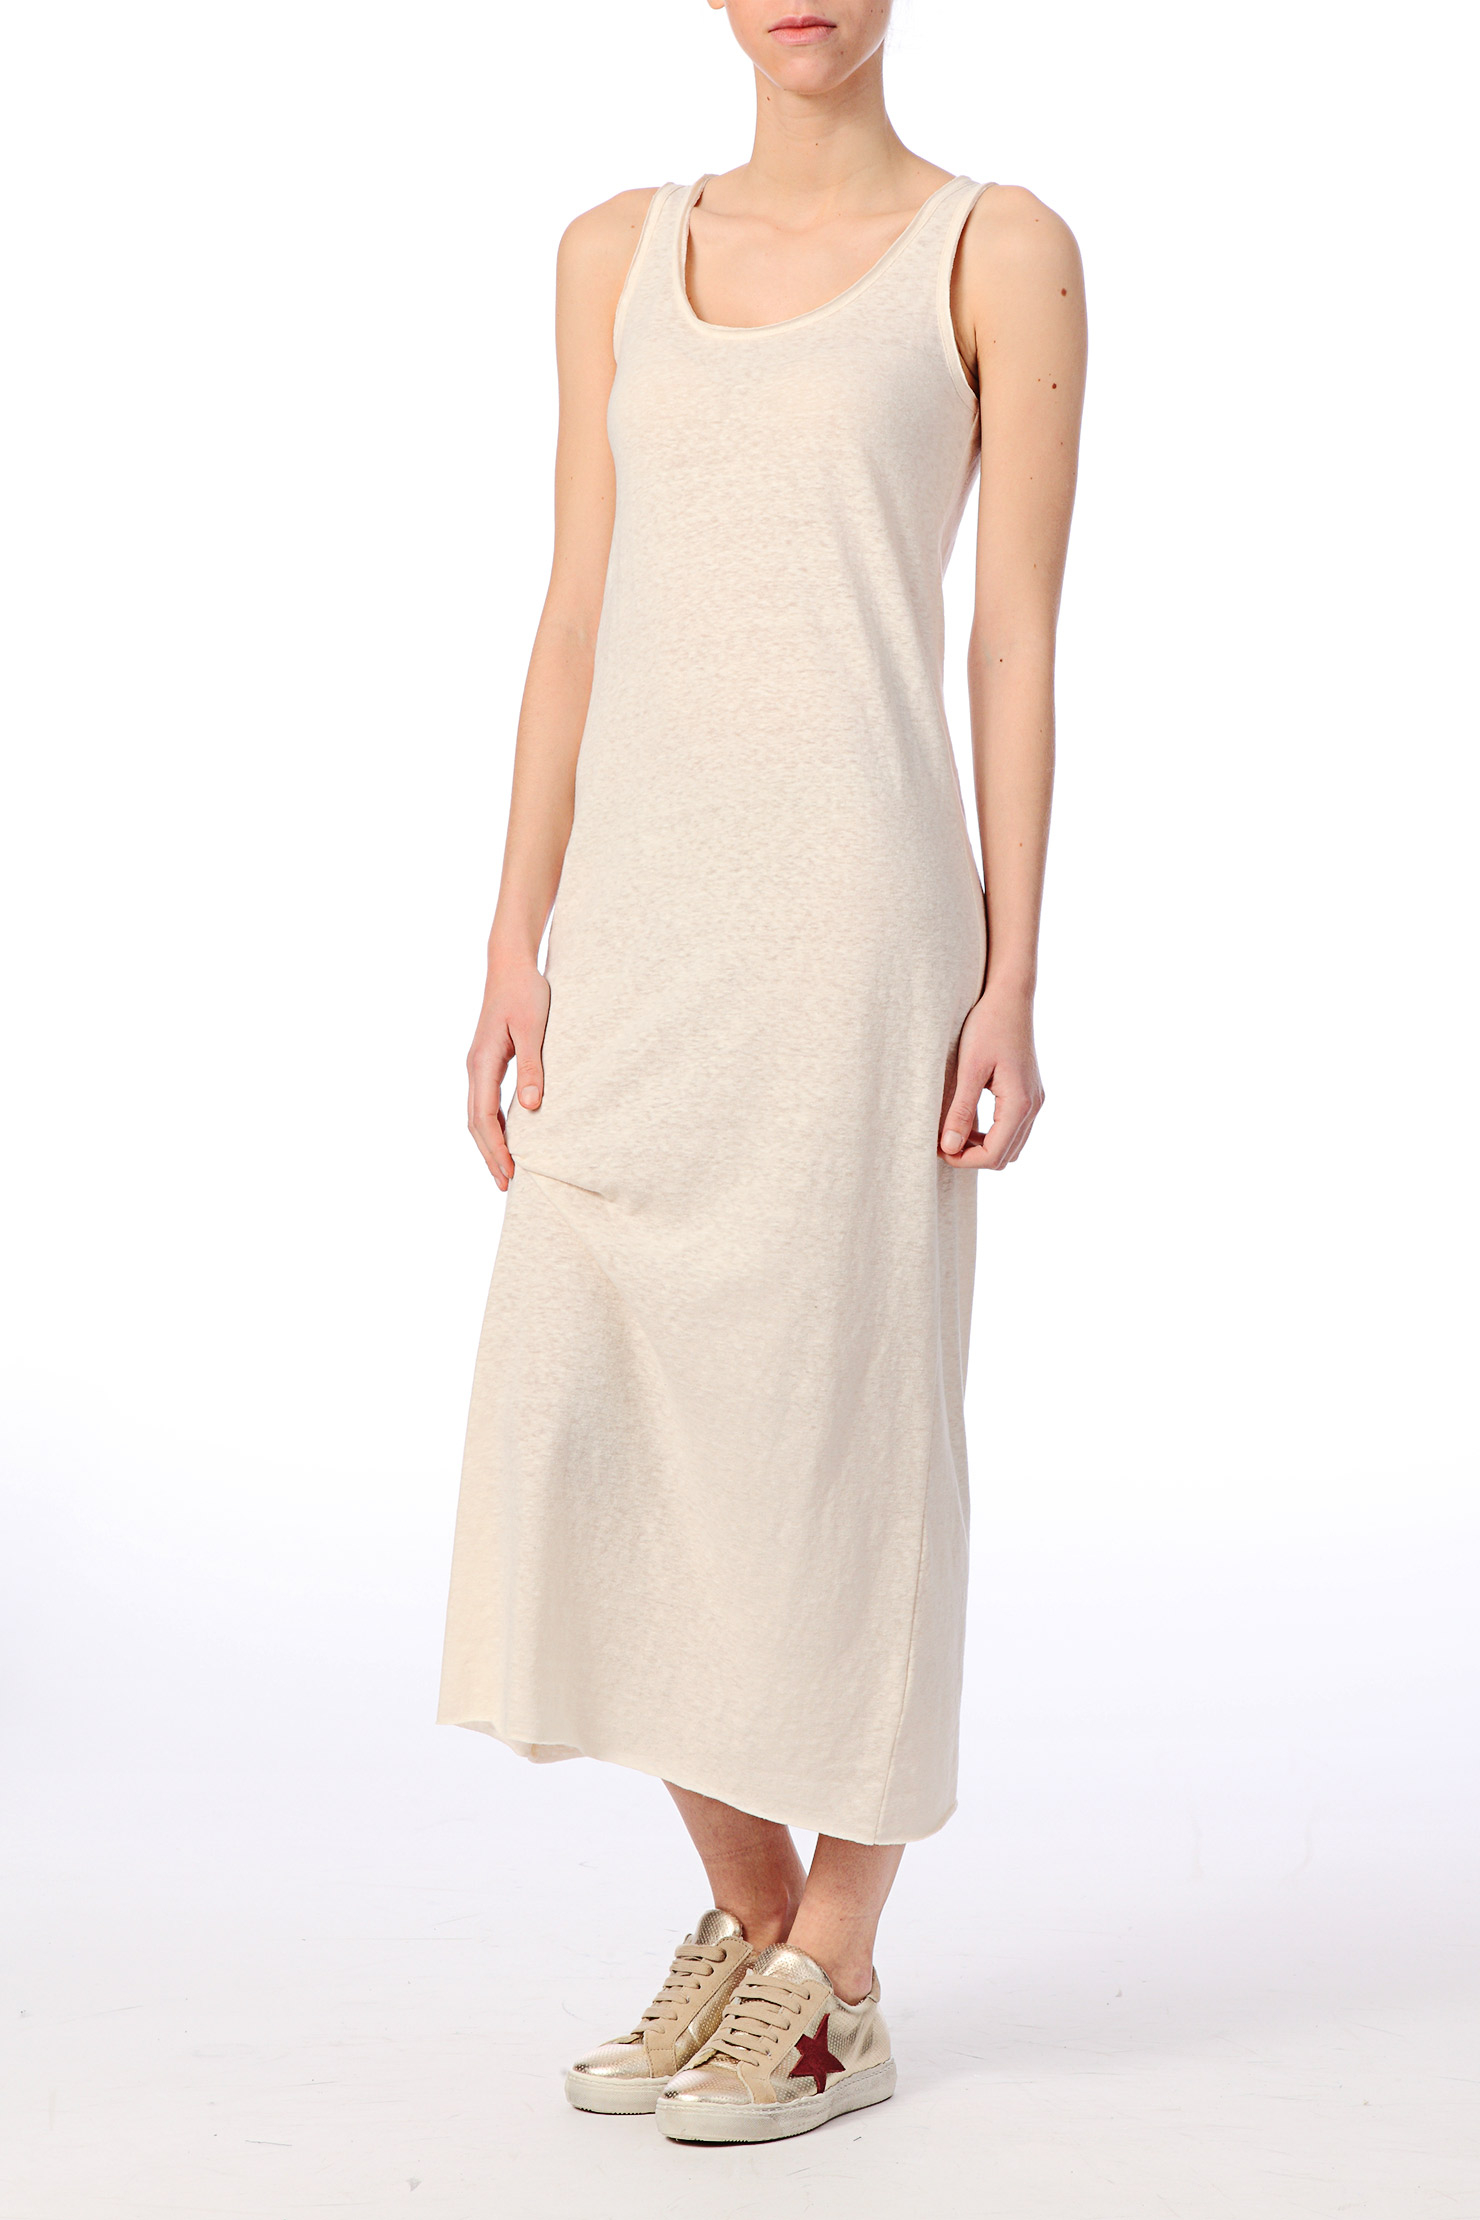 American Vintage Pencil Dress in White | Lyst